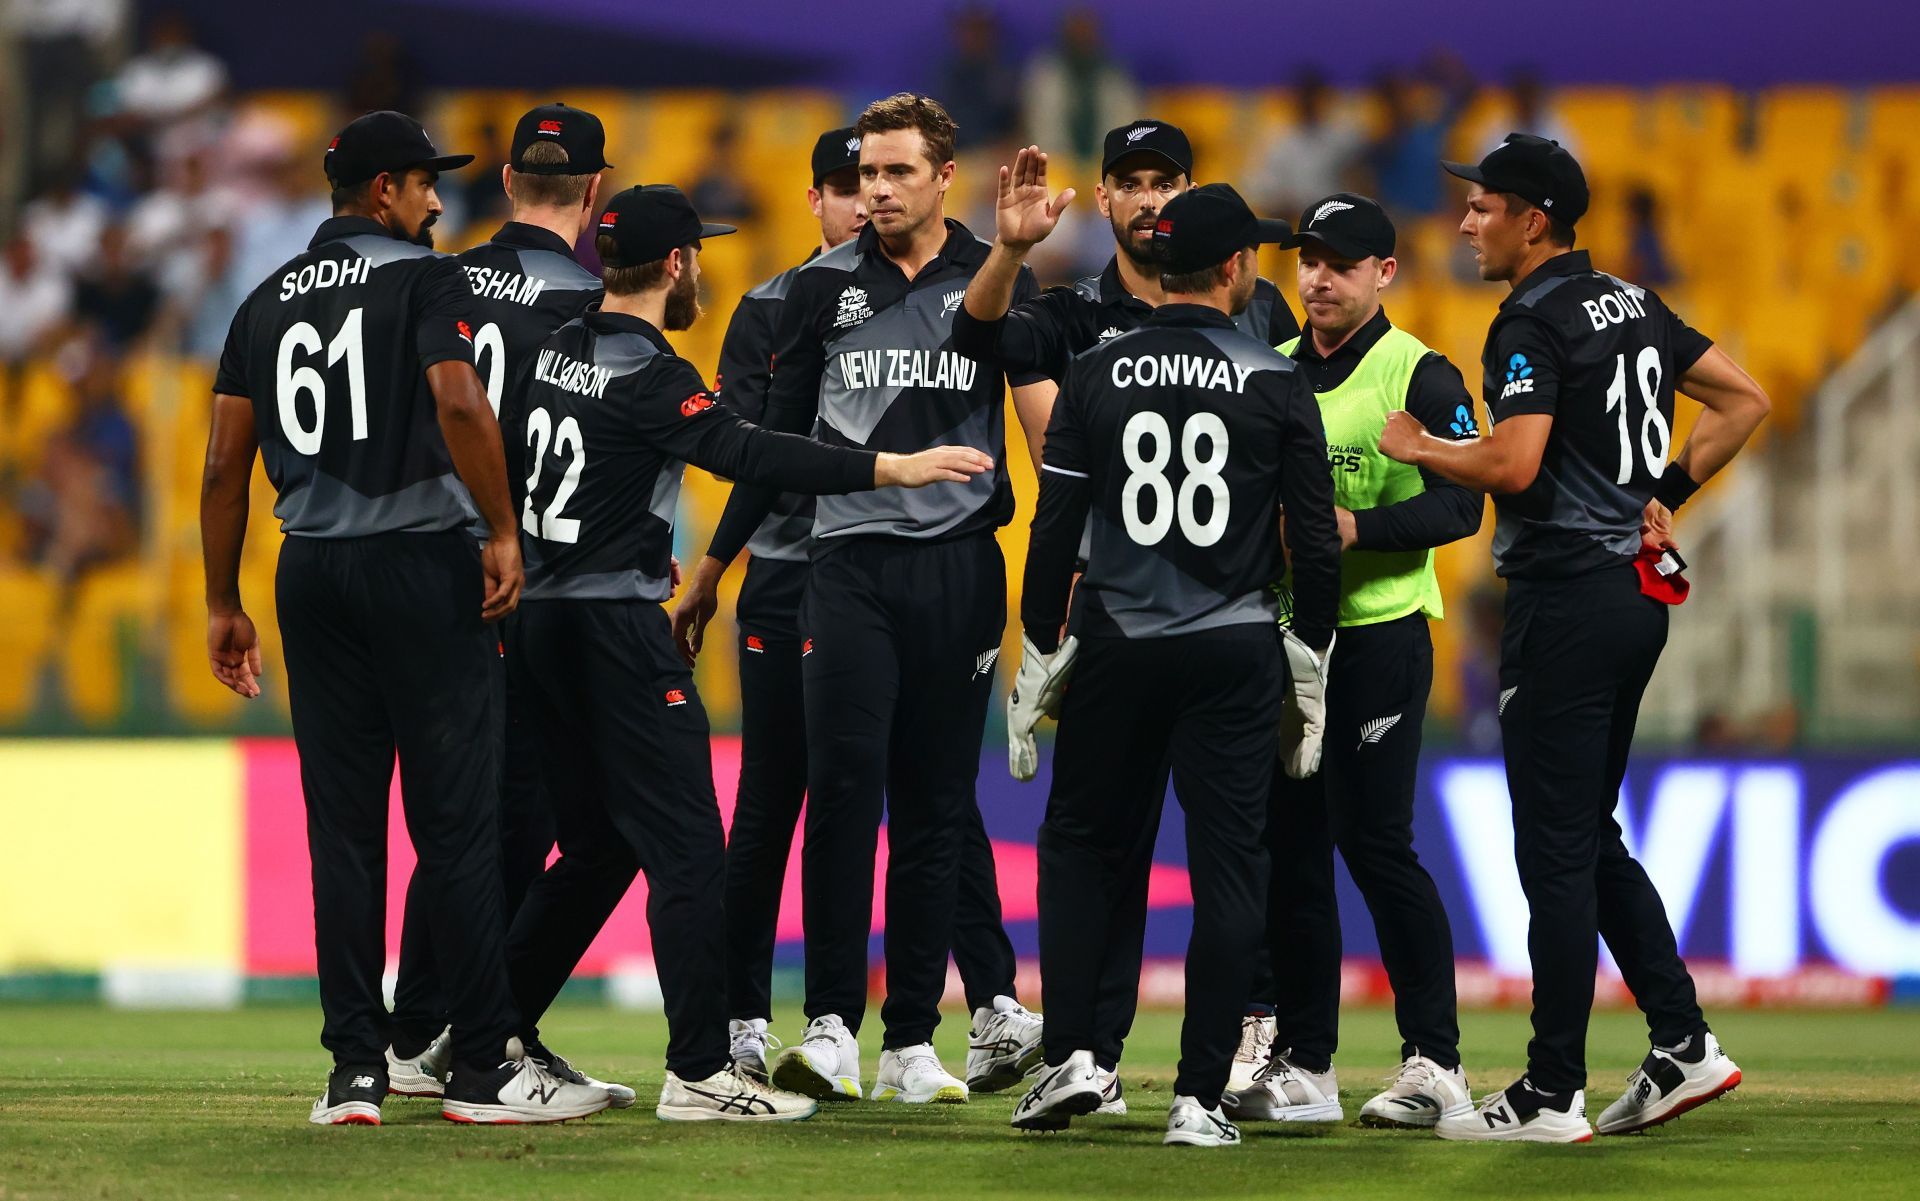 New Zealand will take on Australia in the 2021 T20 World Cup final.